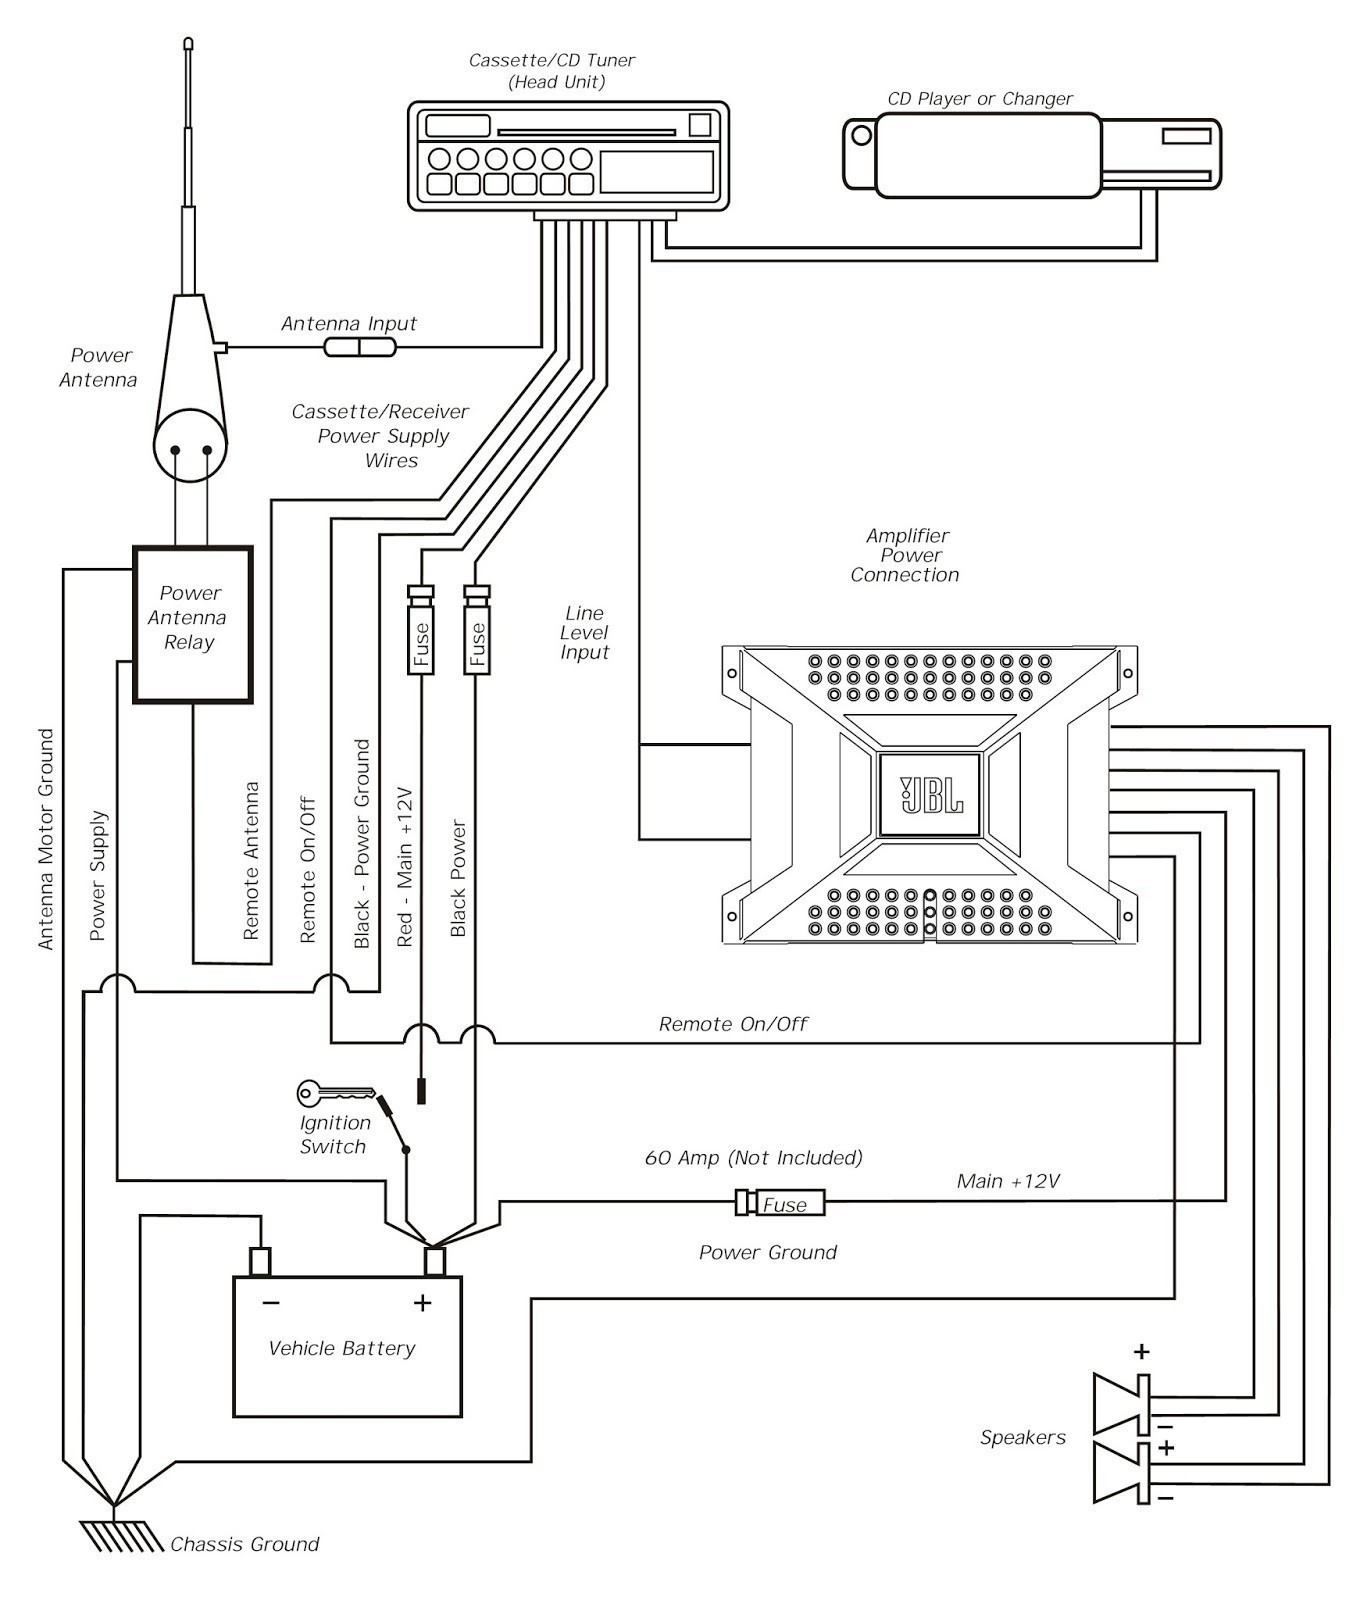 Wiring Diagram for A Car Stereo 55c Car Stereo Capacitor Wiring Of Wiring Diagram for A Car Stereo